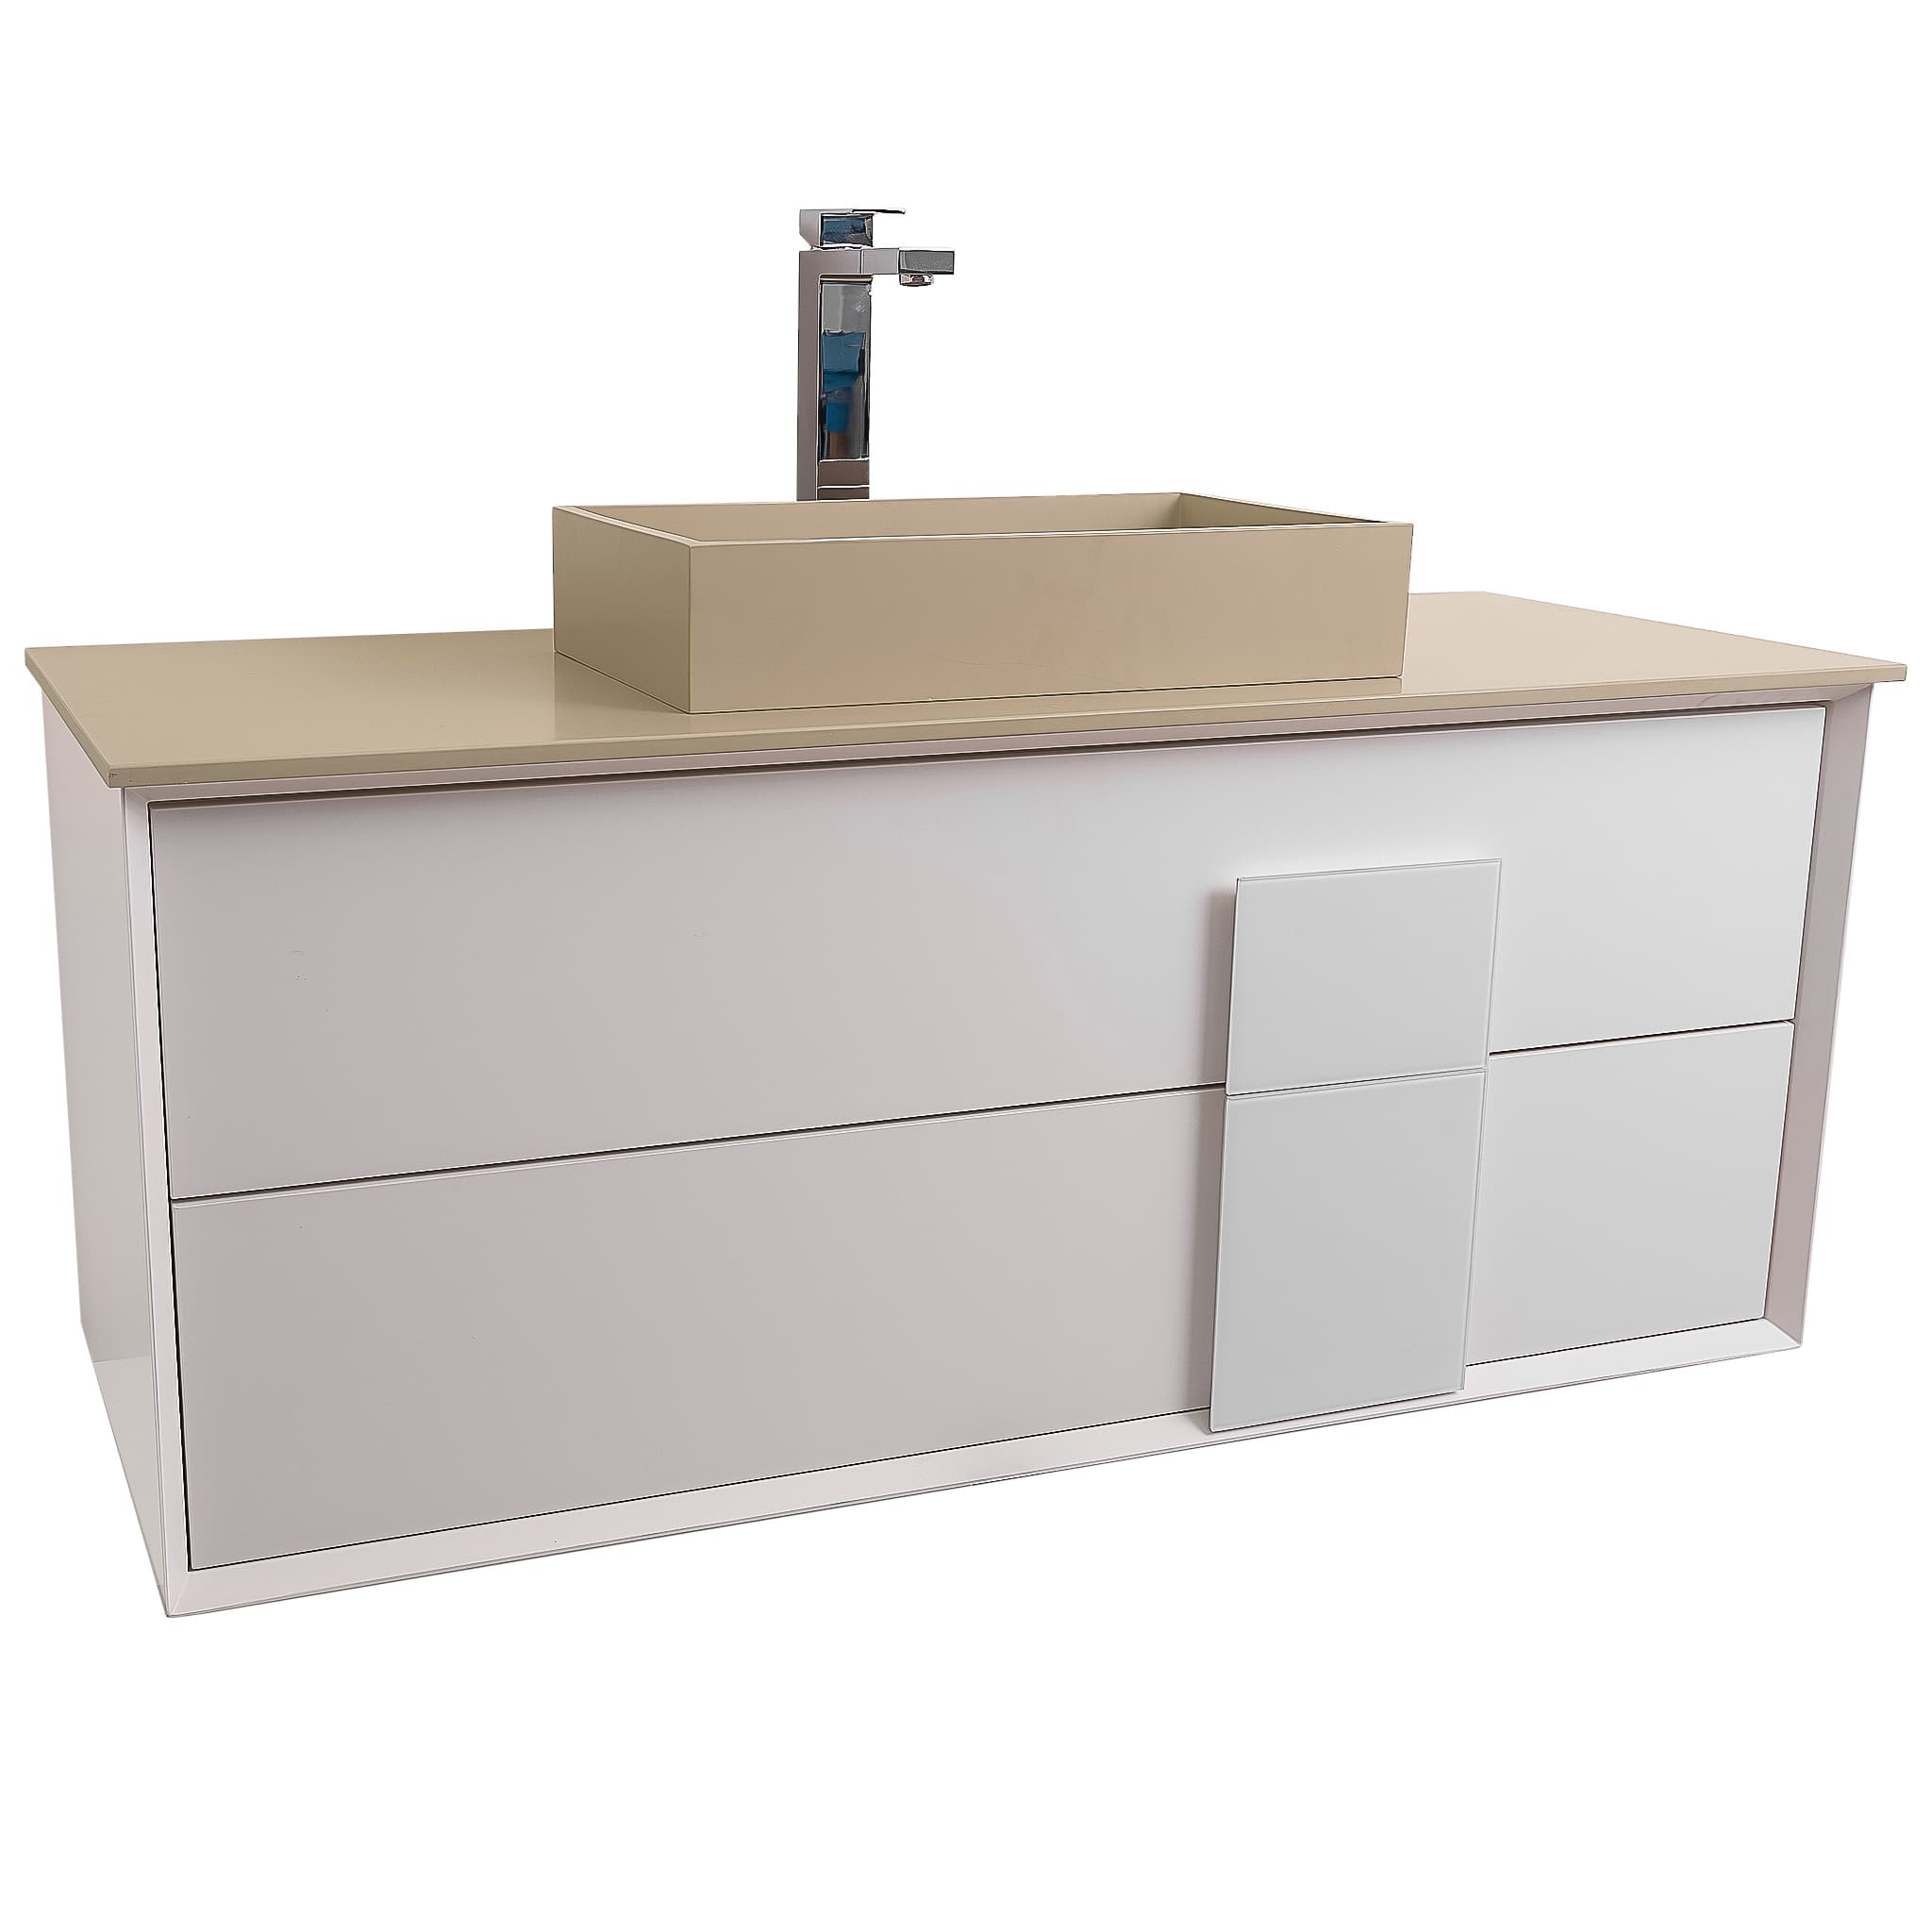 Piazza 47.5 Matte White With White Handle Cabinet, Solid Surface Flat Taupe Counter and Infinity Square Solid Surface Taupe Basin 1329, Wall Mounted Modern Vanity Set